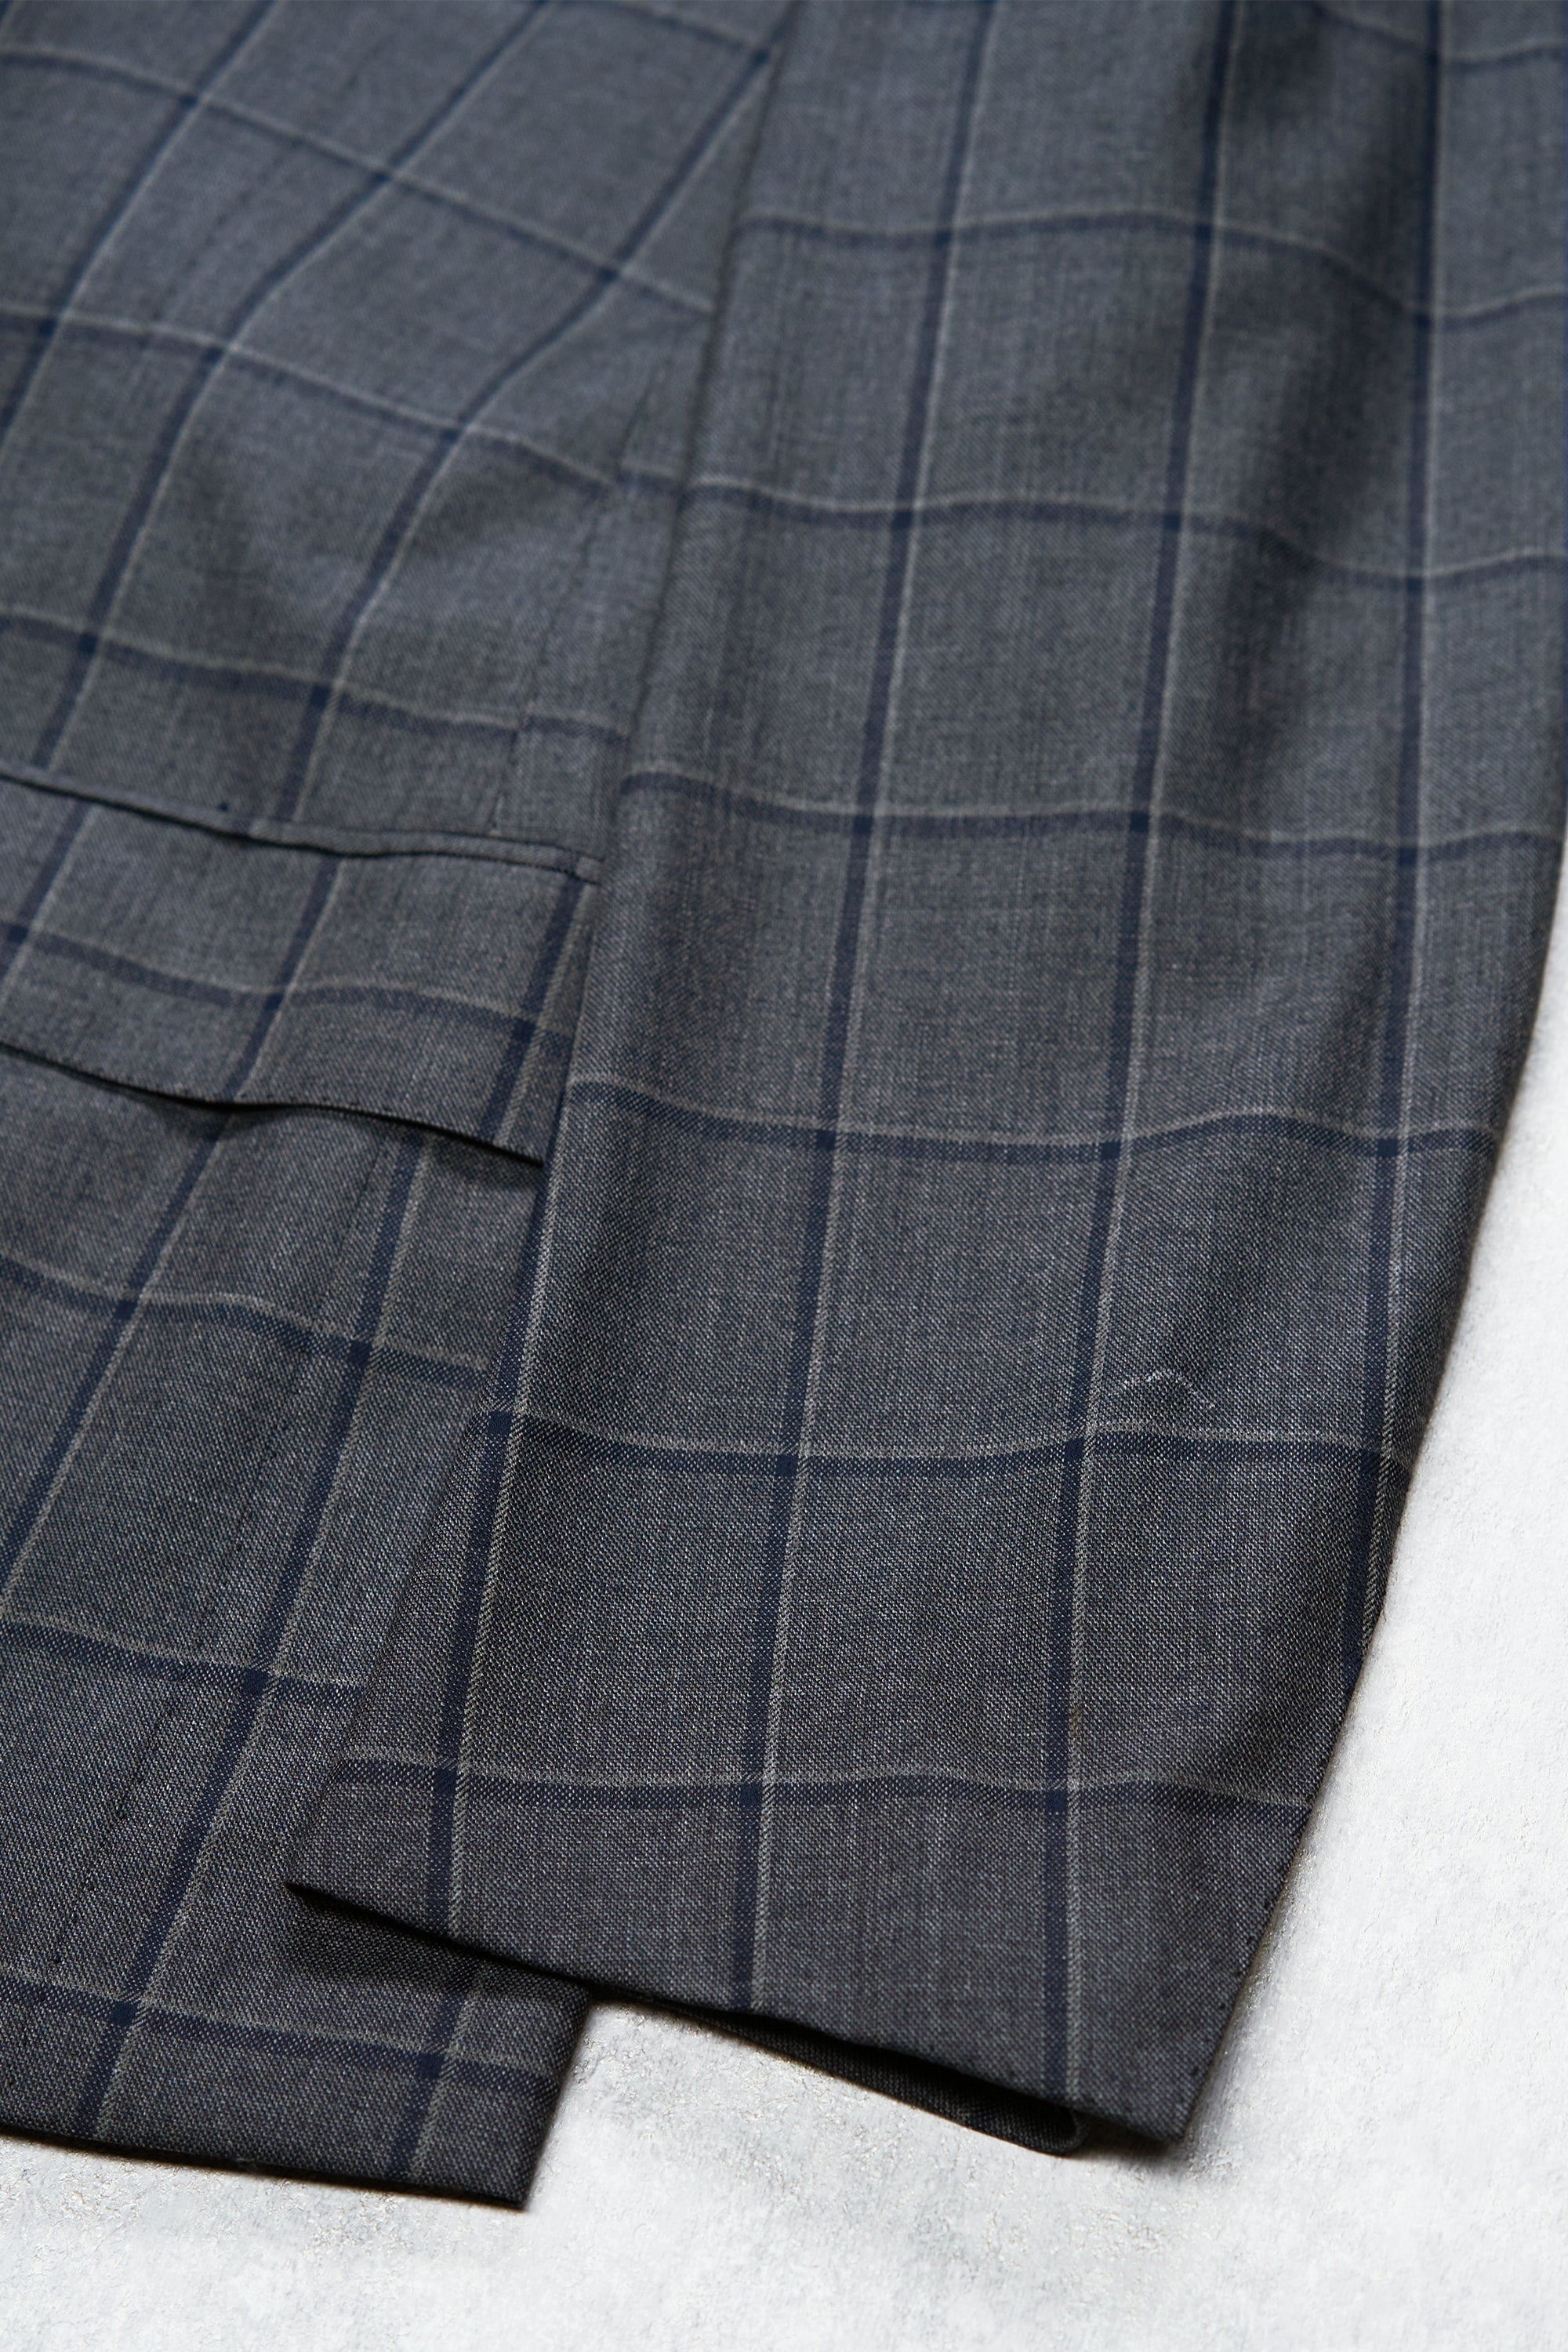 Cesare Attolini Grey with Navy Windowpane Wool/Cashmere Suit